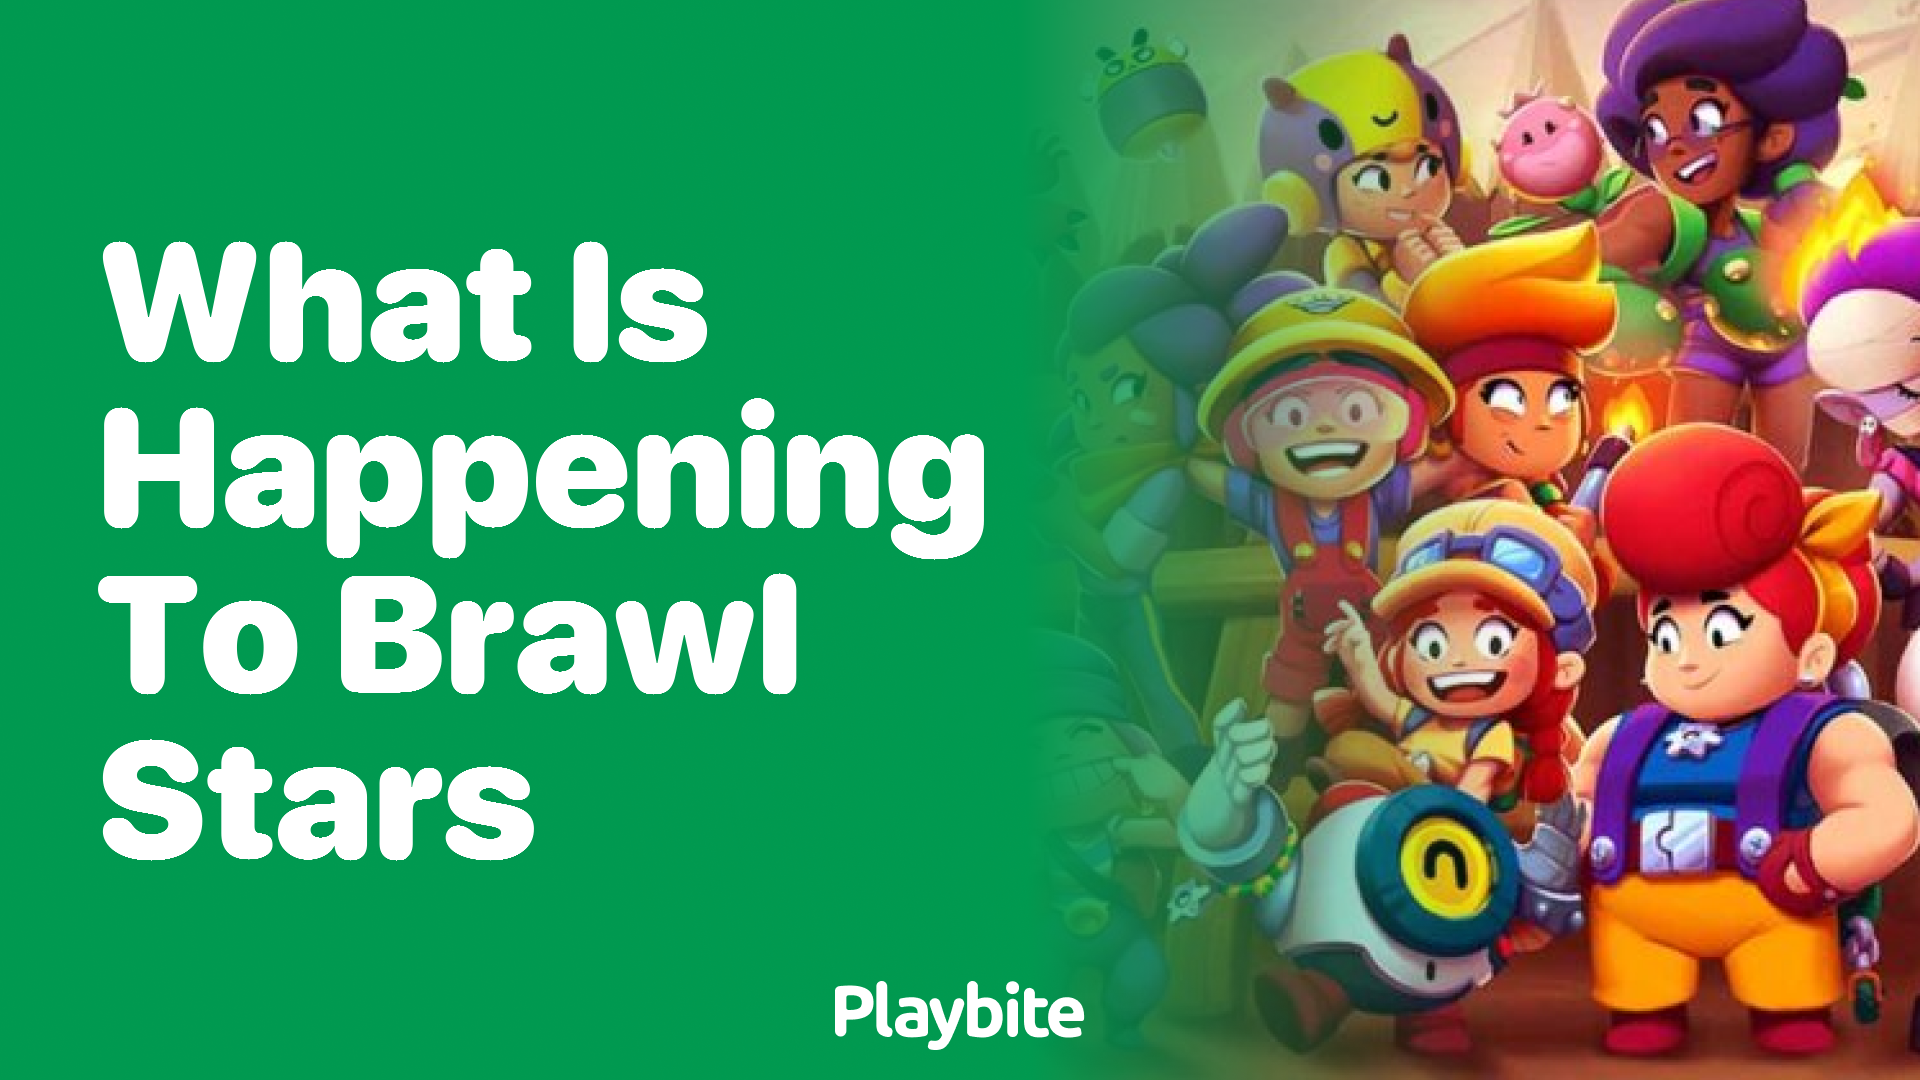 What is Happening to Brawl Stars? Insights and Updates